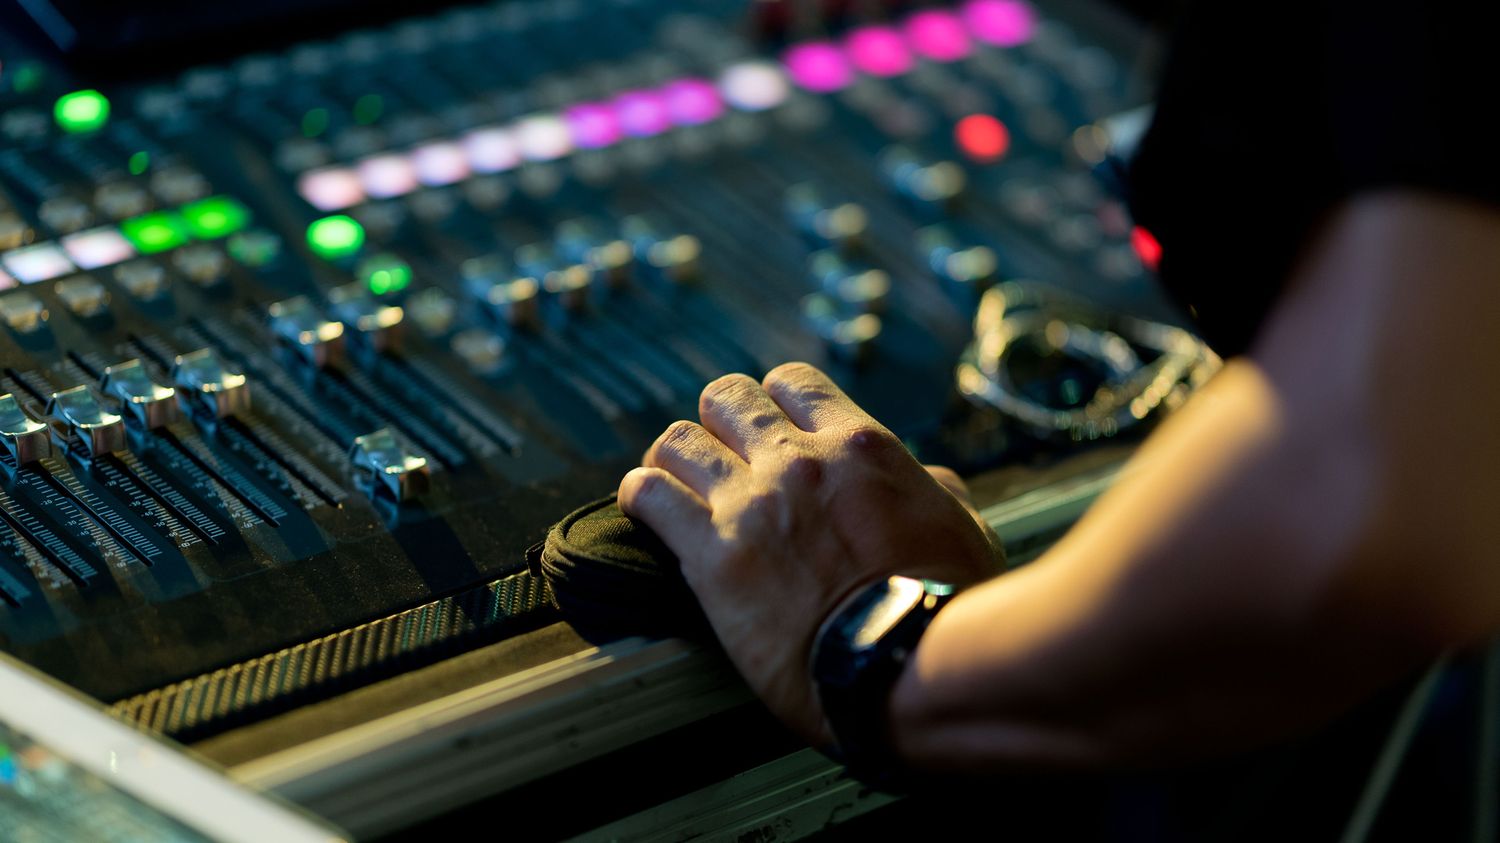 What Is The Business Code For A Freelance Live Sound Engineer